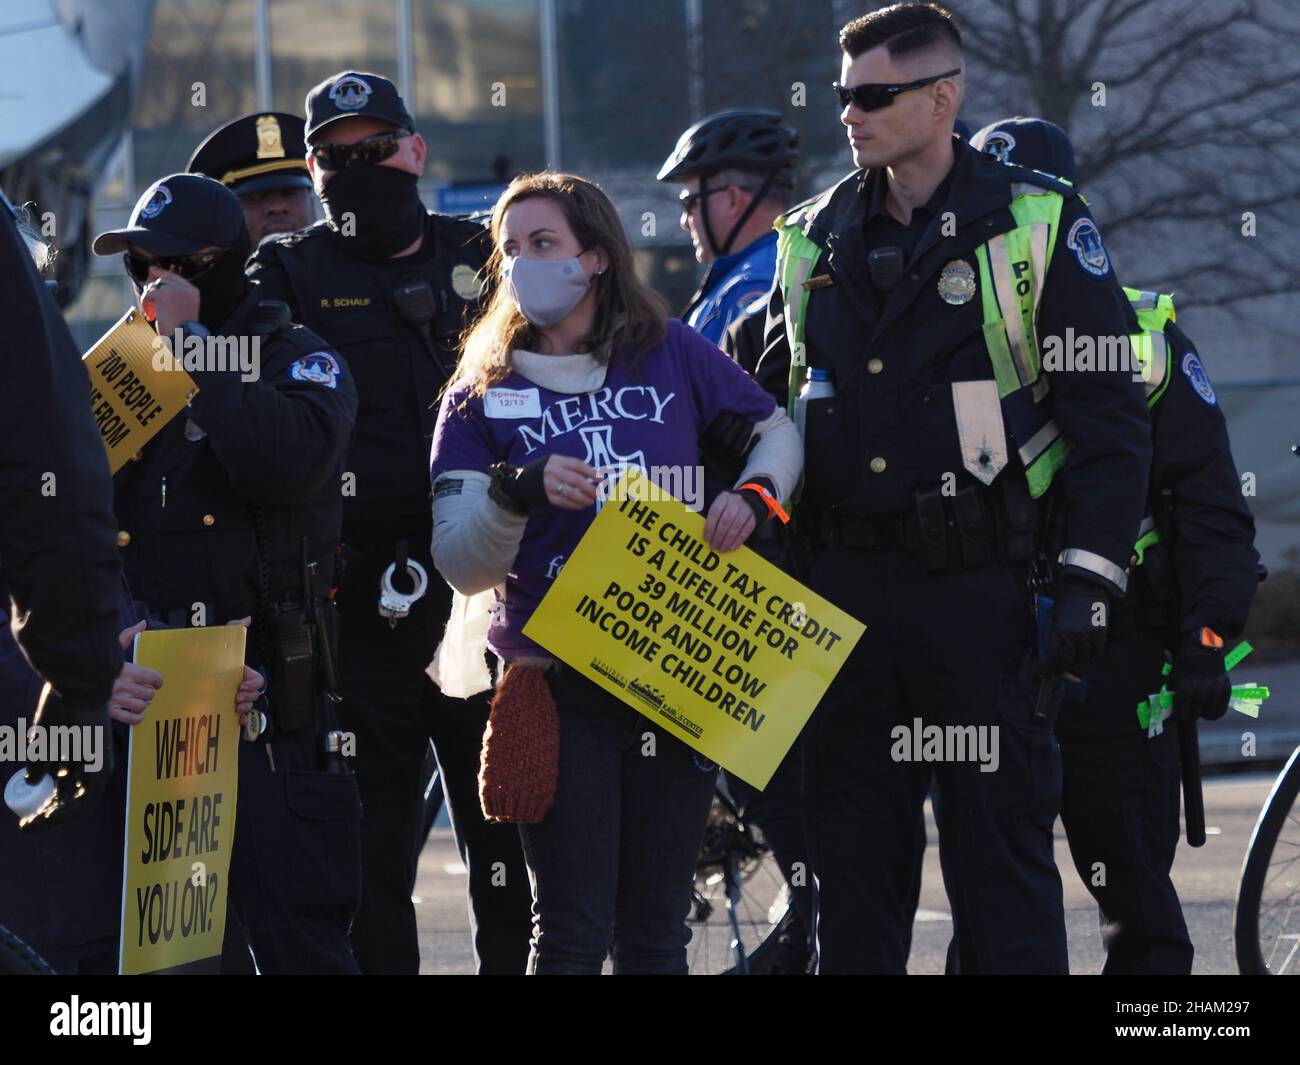 December 13, 2021, Washington, District of Columbia, USA: A member of the Mercy Justice movement was among the dozens arrested for civil disobedience following the Poor People CampaignÃs 'Get it Done in Ã21' rally at the US Capitol. Participants came from close to three dozen states to demand passage of stalled voting rights legislation and the Build Back Better plan before the end of December.The Poor PeopleÃs Campaign: A National Call for Moral Revival rallied at the US Capitol to demand Congress pass voting rights protections and the Build Back Better plan before the end of the year. ( Stock Photo